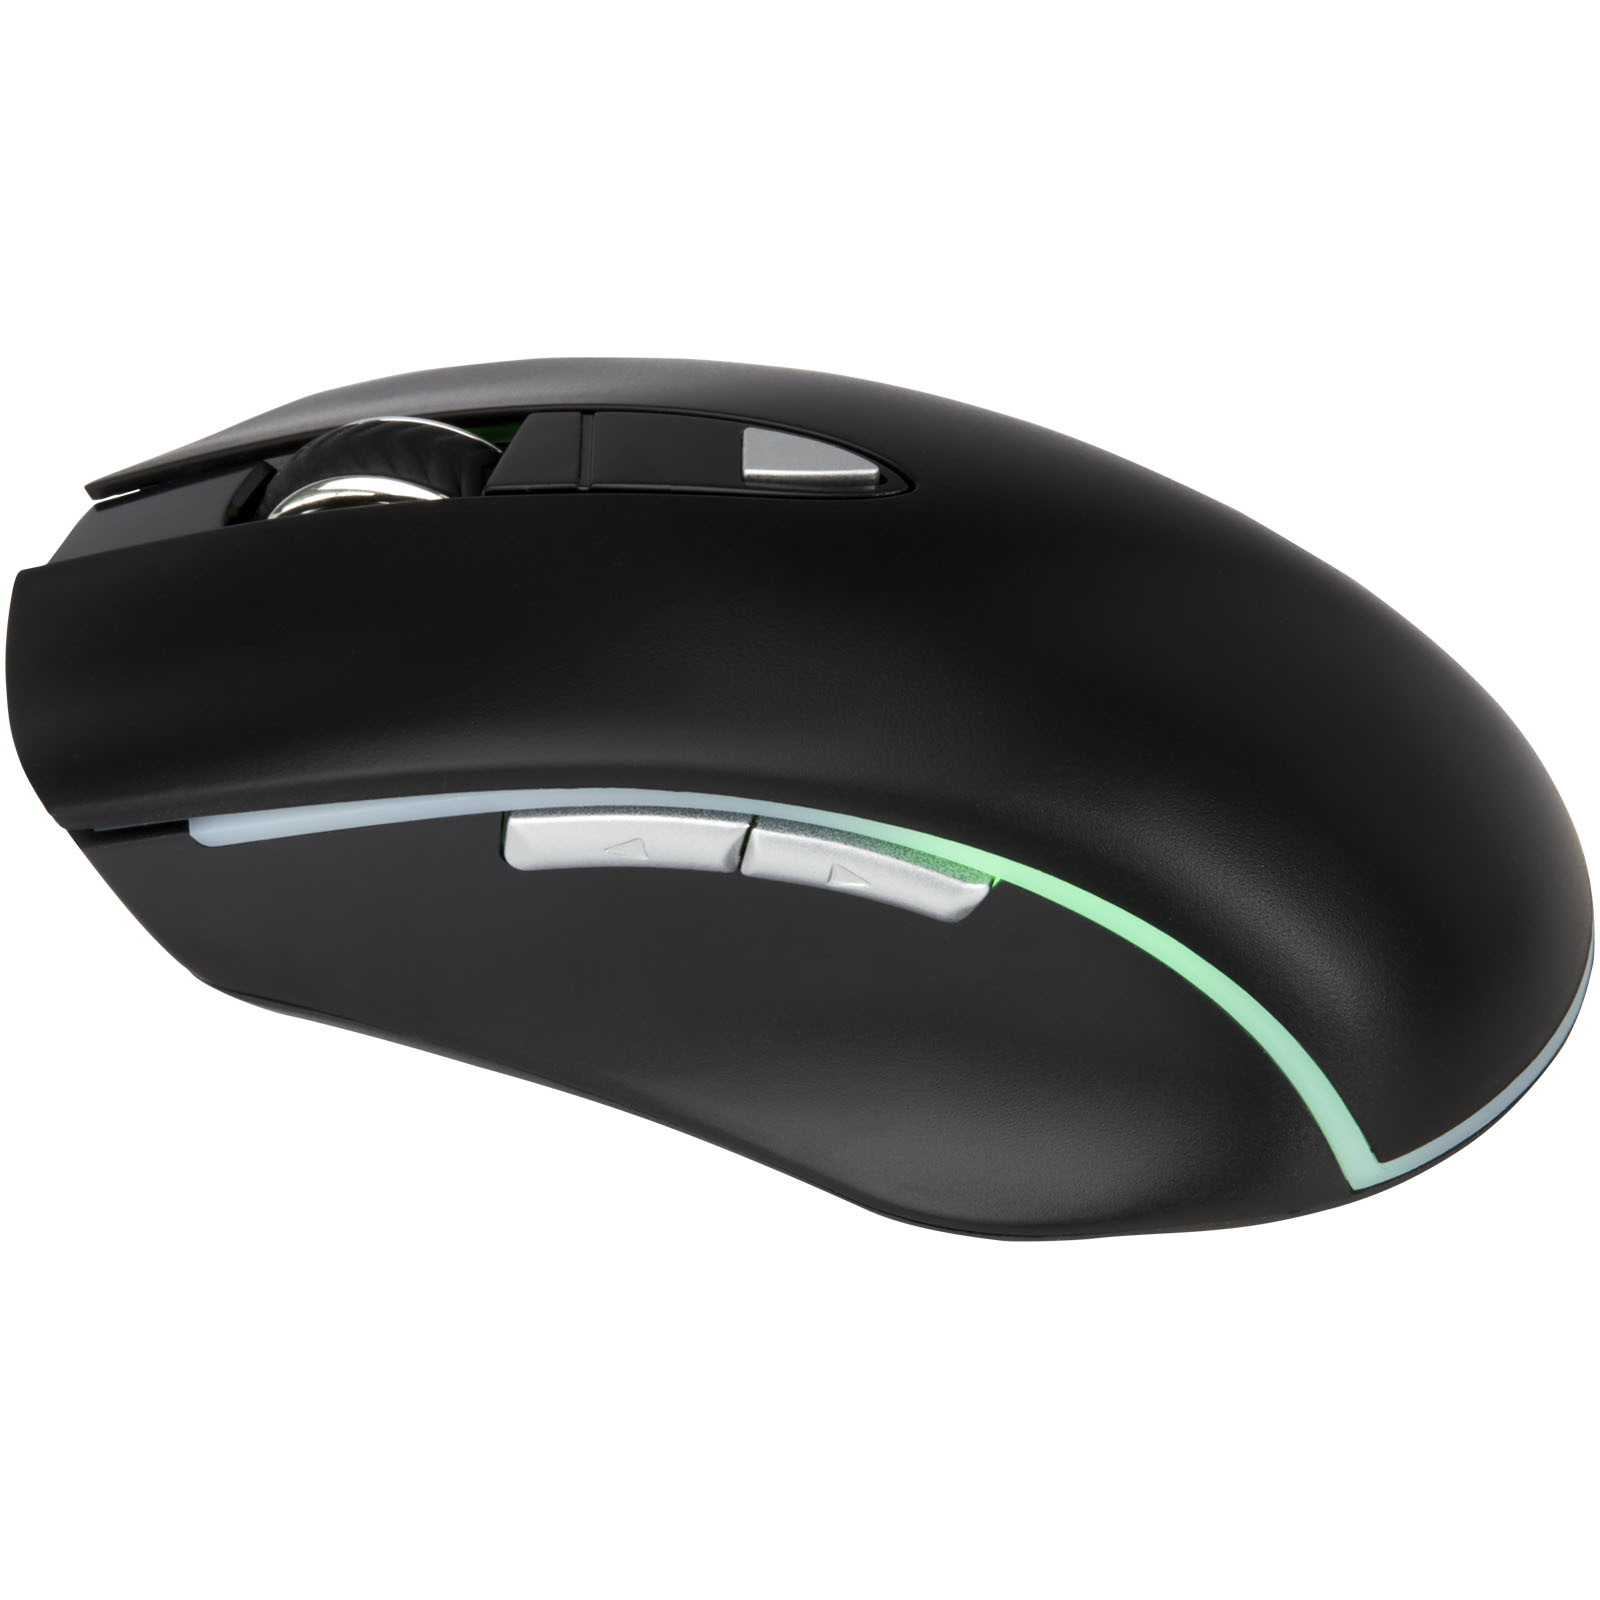 Plastic computer mouse HAWTH with backlight - solid black